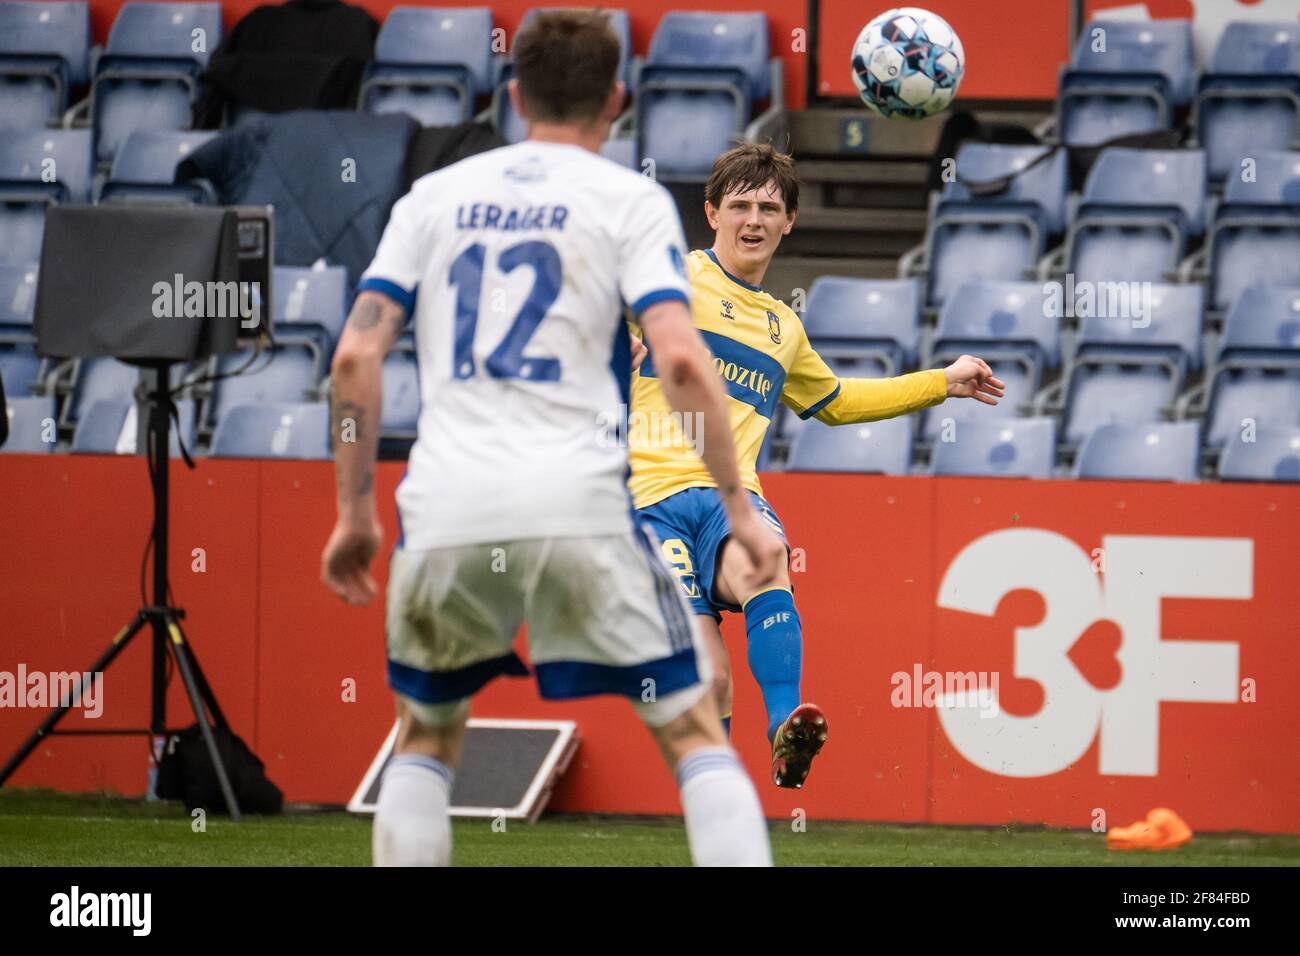 Brondby, Denmark. 11th Apr, 2021. Peter Bjur (29) of Brondby IF seen during the 3F Superliga match Brondby IF and FC Copenhagen at Brondby Stadium in Brondby. (Photo Credit: Gonzales Photo/Alamy